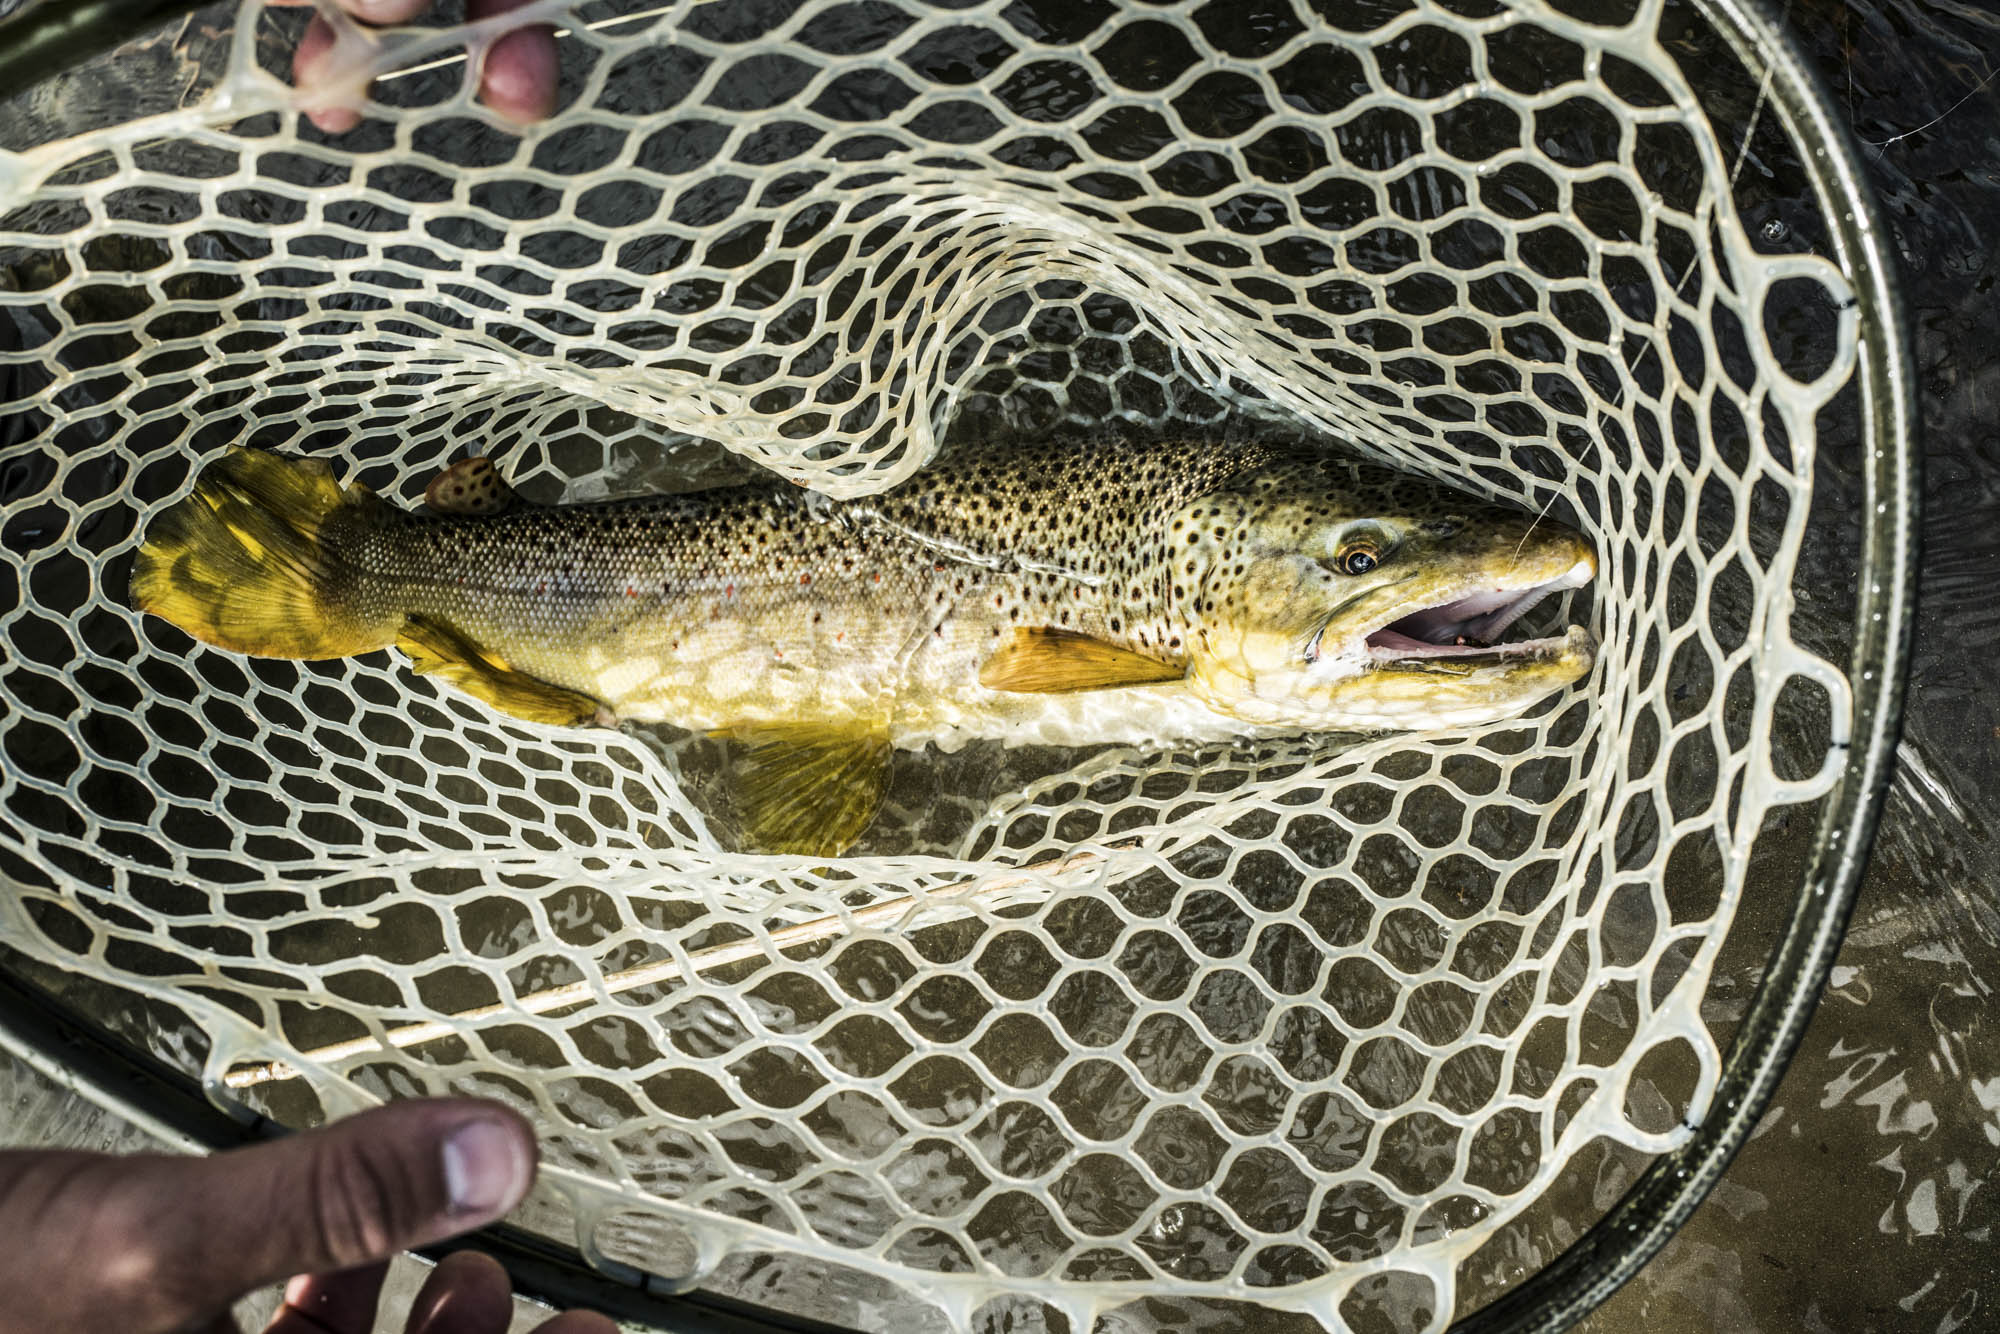 Orvis Helios 3 Review: One Fly Rod to Rule Them all - Bloomberg